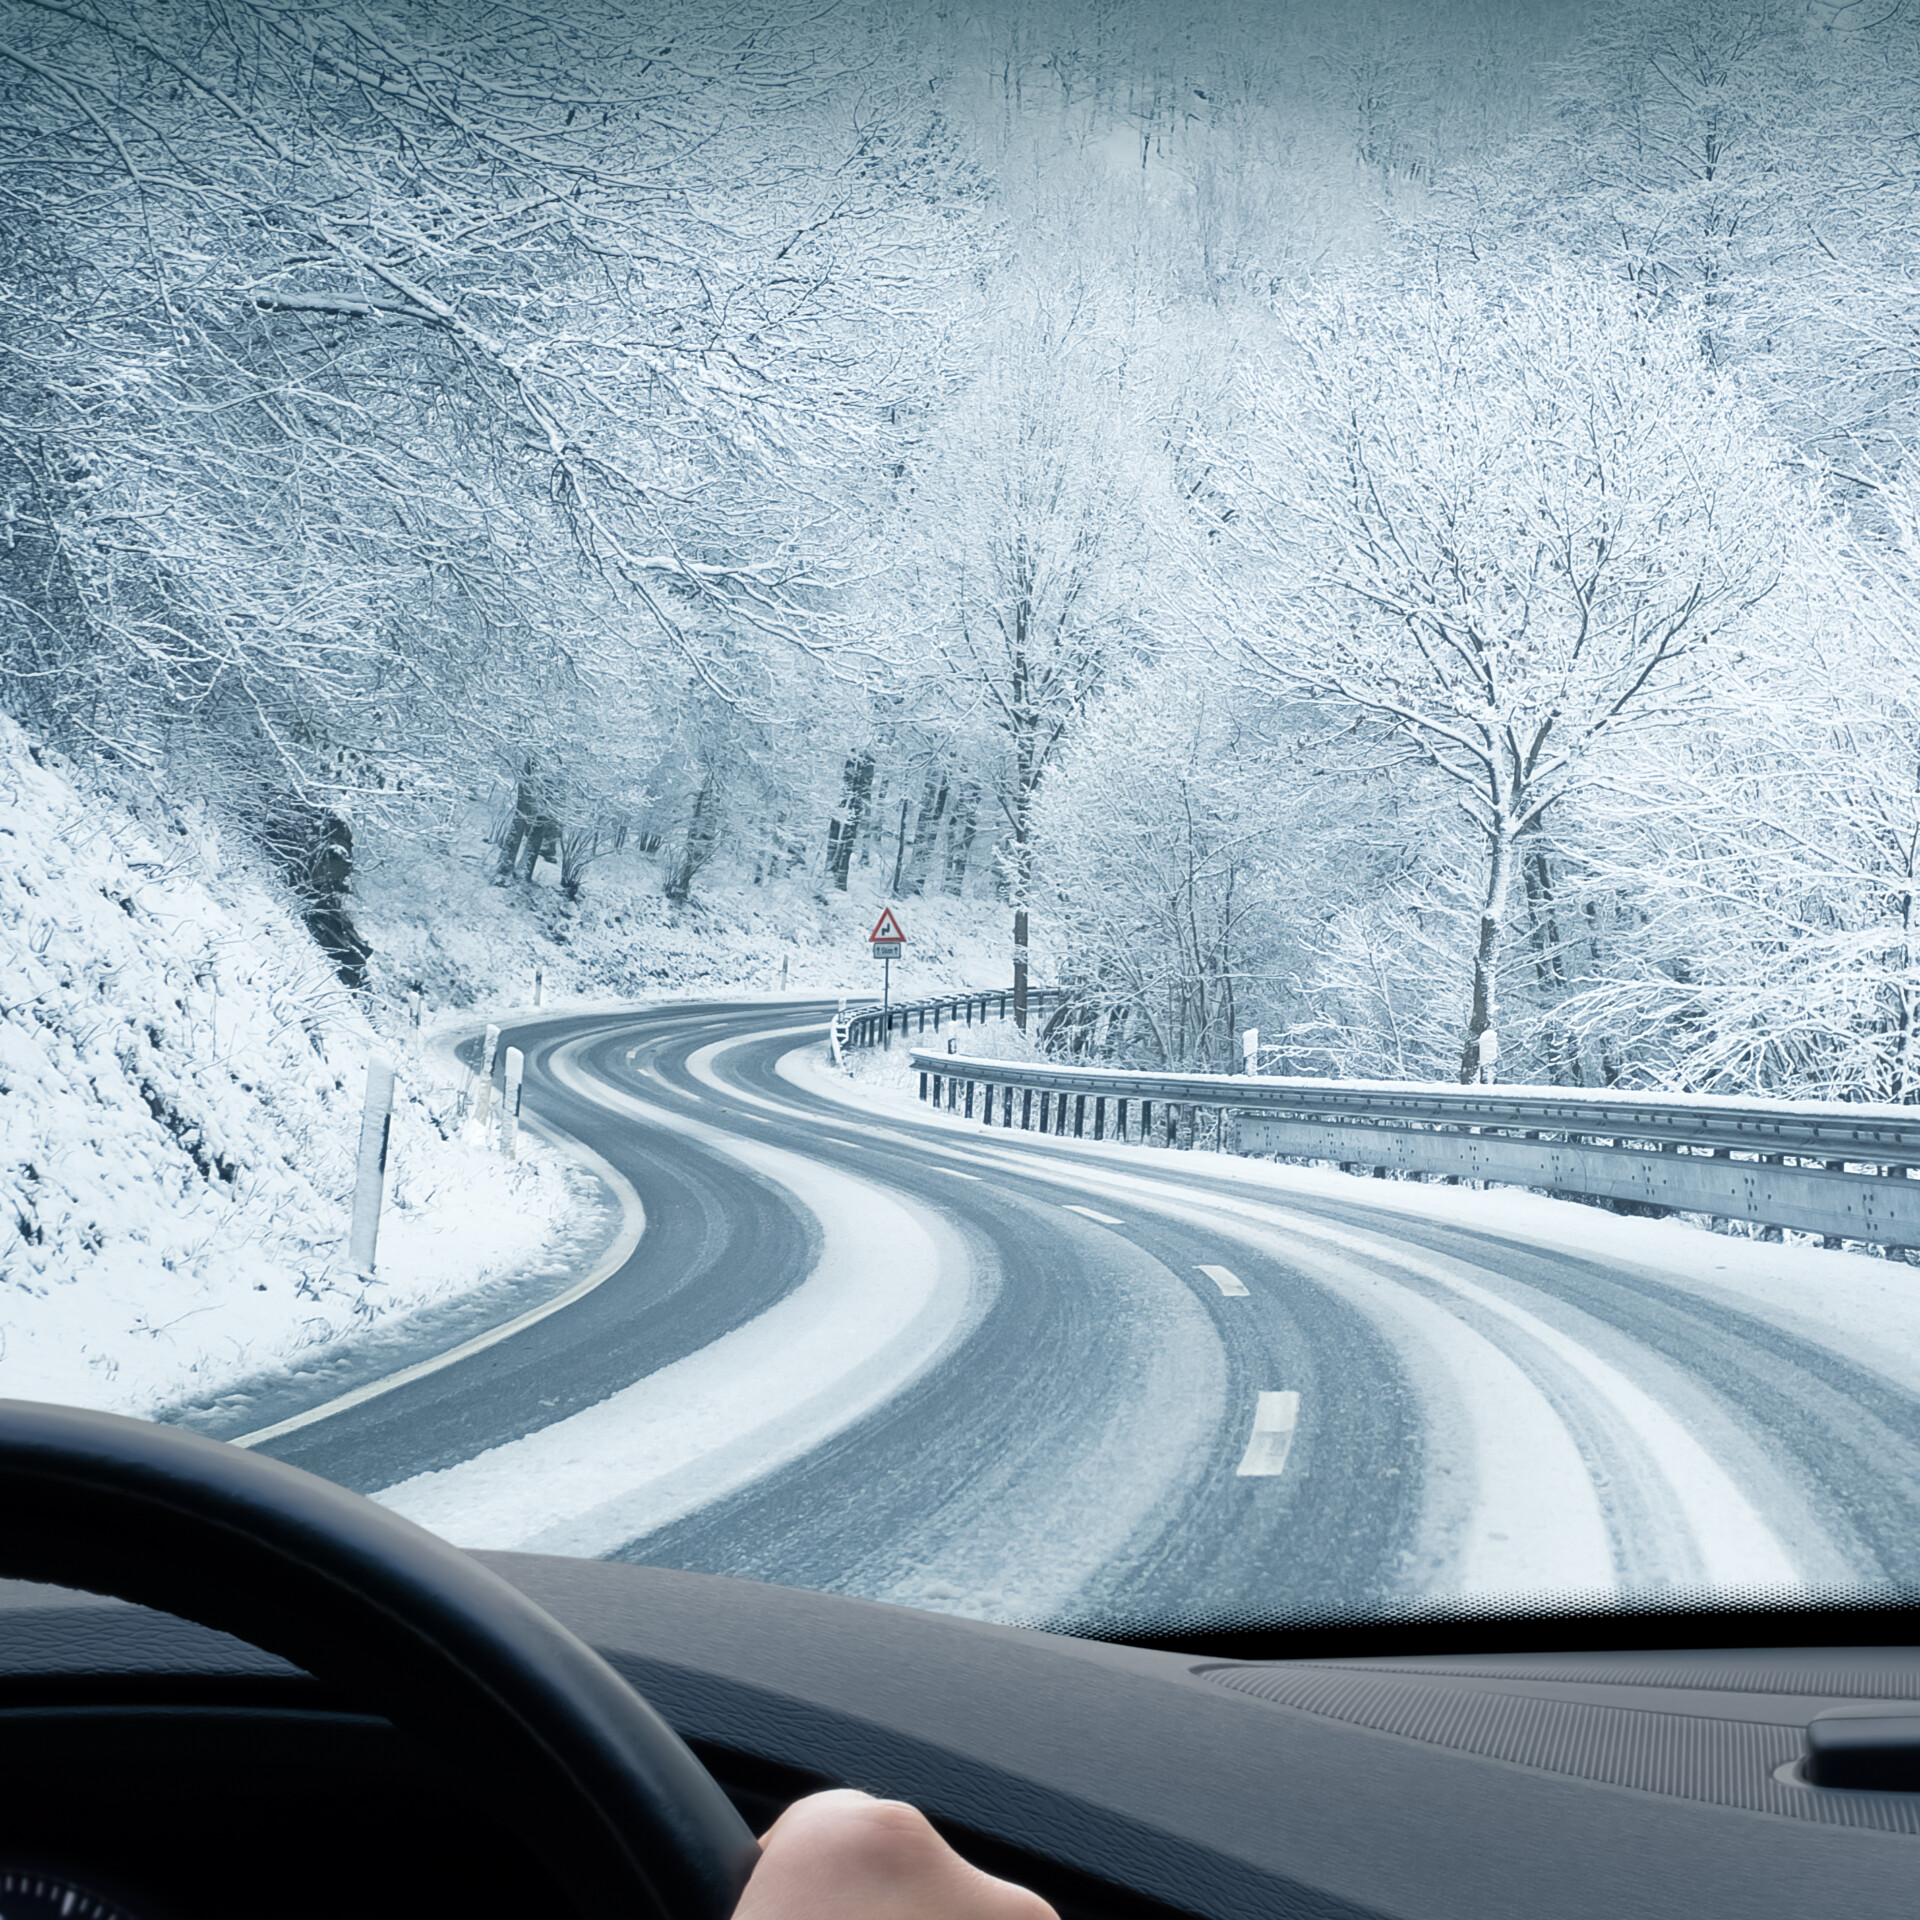 Winter Auto Accidents and Injuries